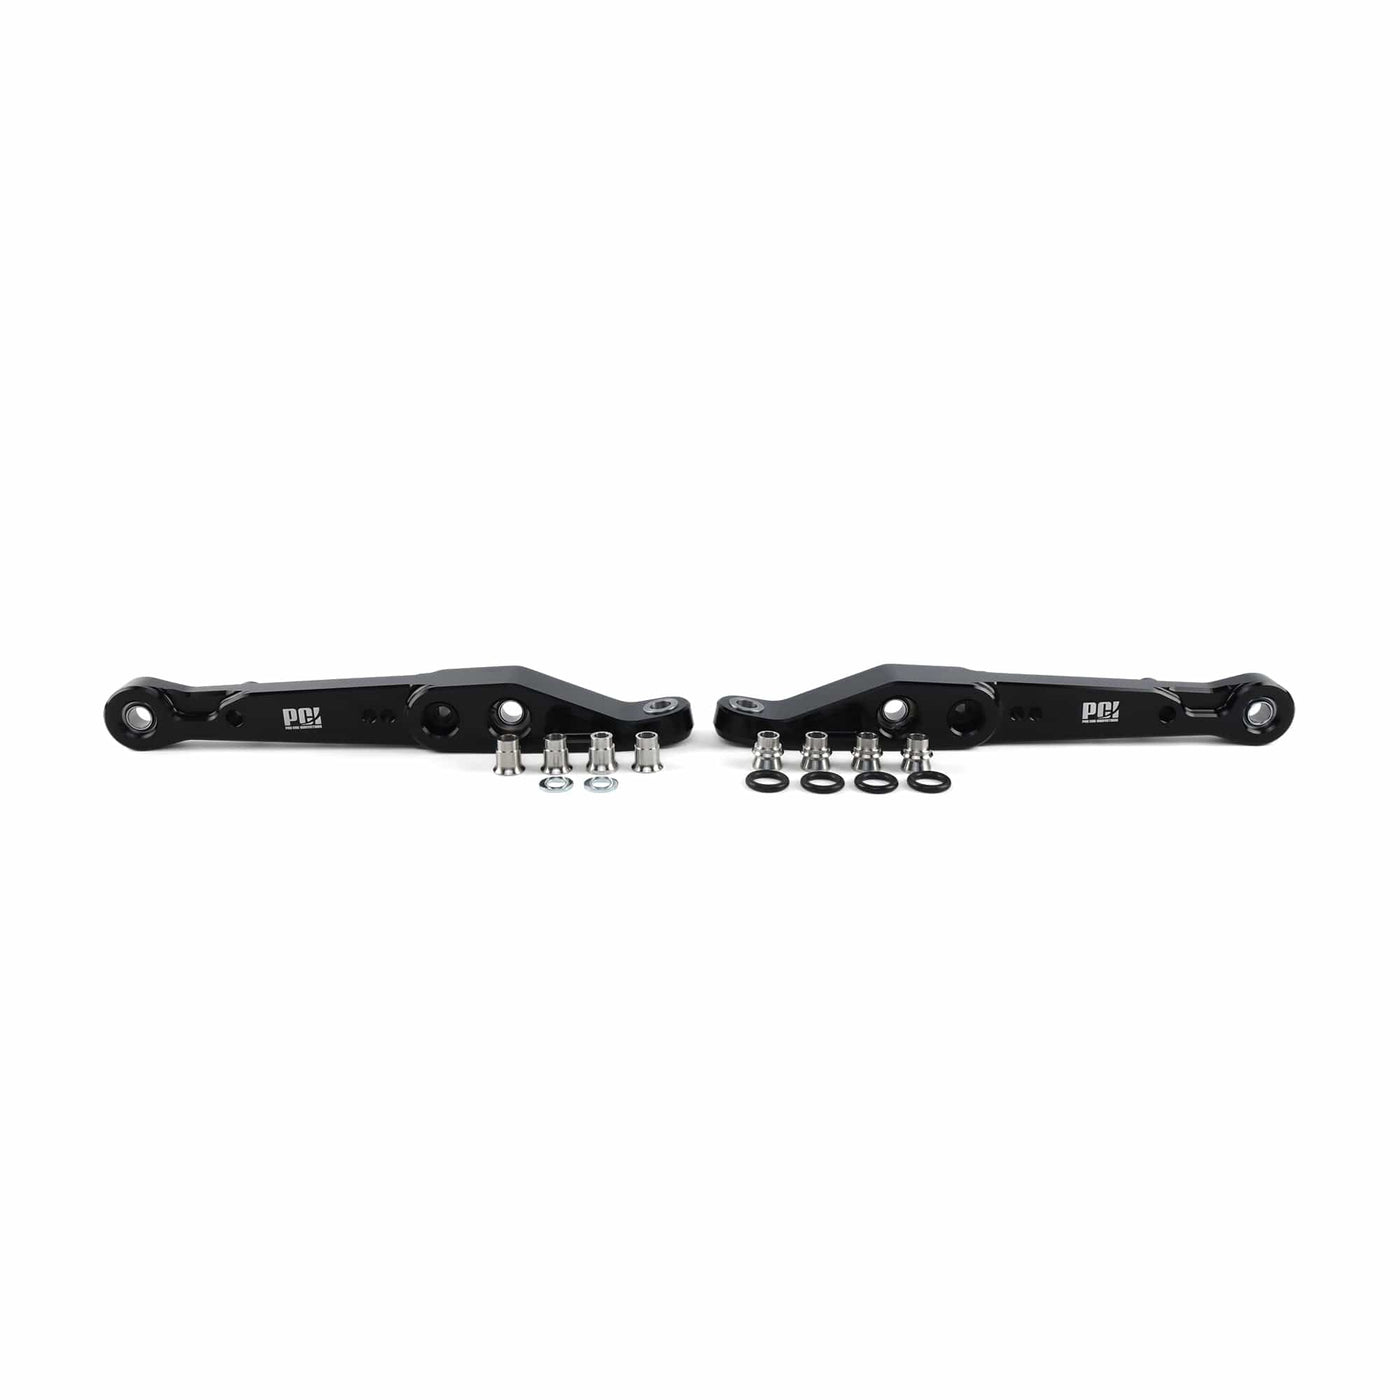 Pro Car Innovations (PCI) PCI Aluminum Front Lower Spherical Control Arms for 92-95 Civic/ 94-01 Integra